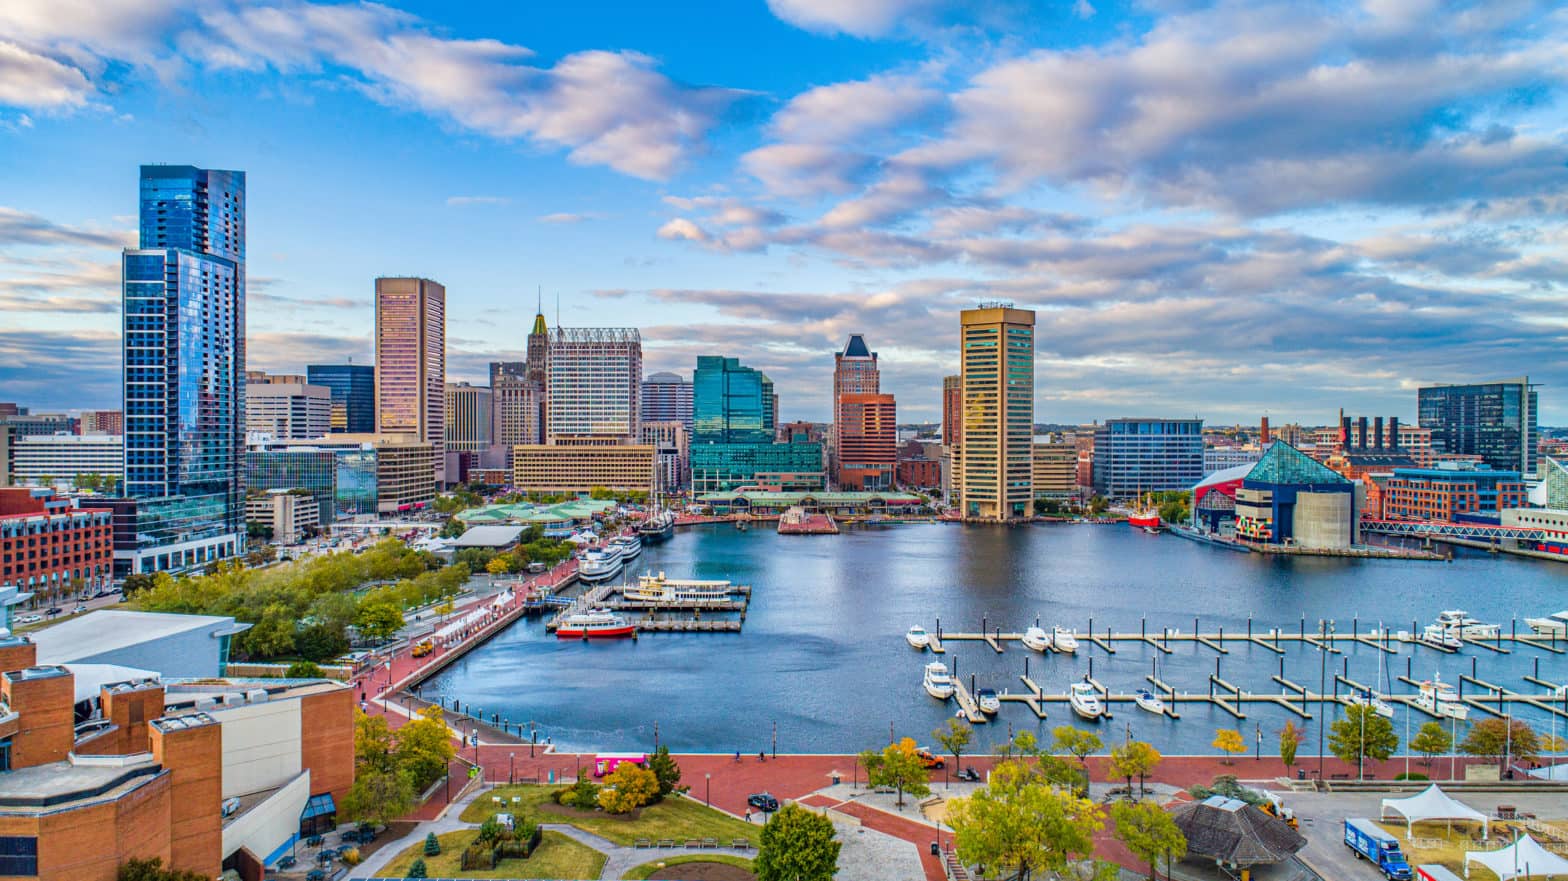 Downtown skyline of Baltimore, Maryland